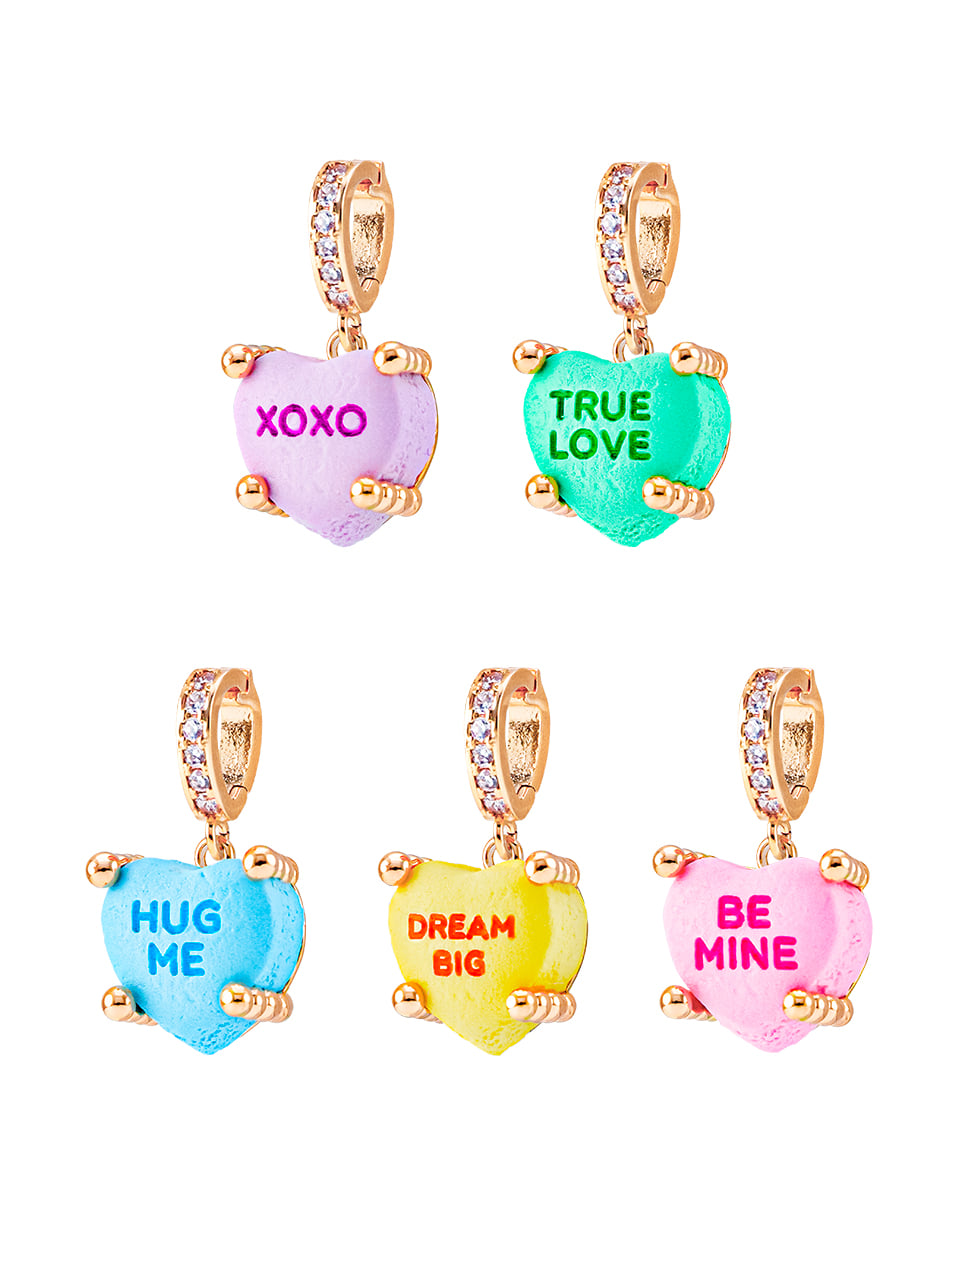 S2 TEXT CANDY PENDANT